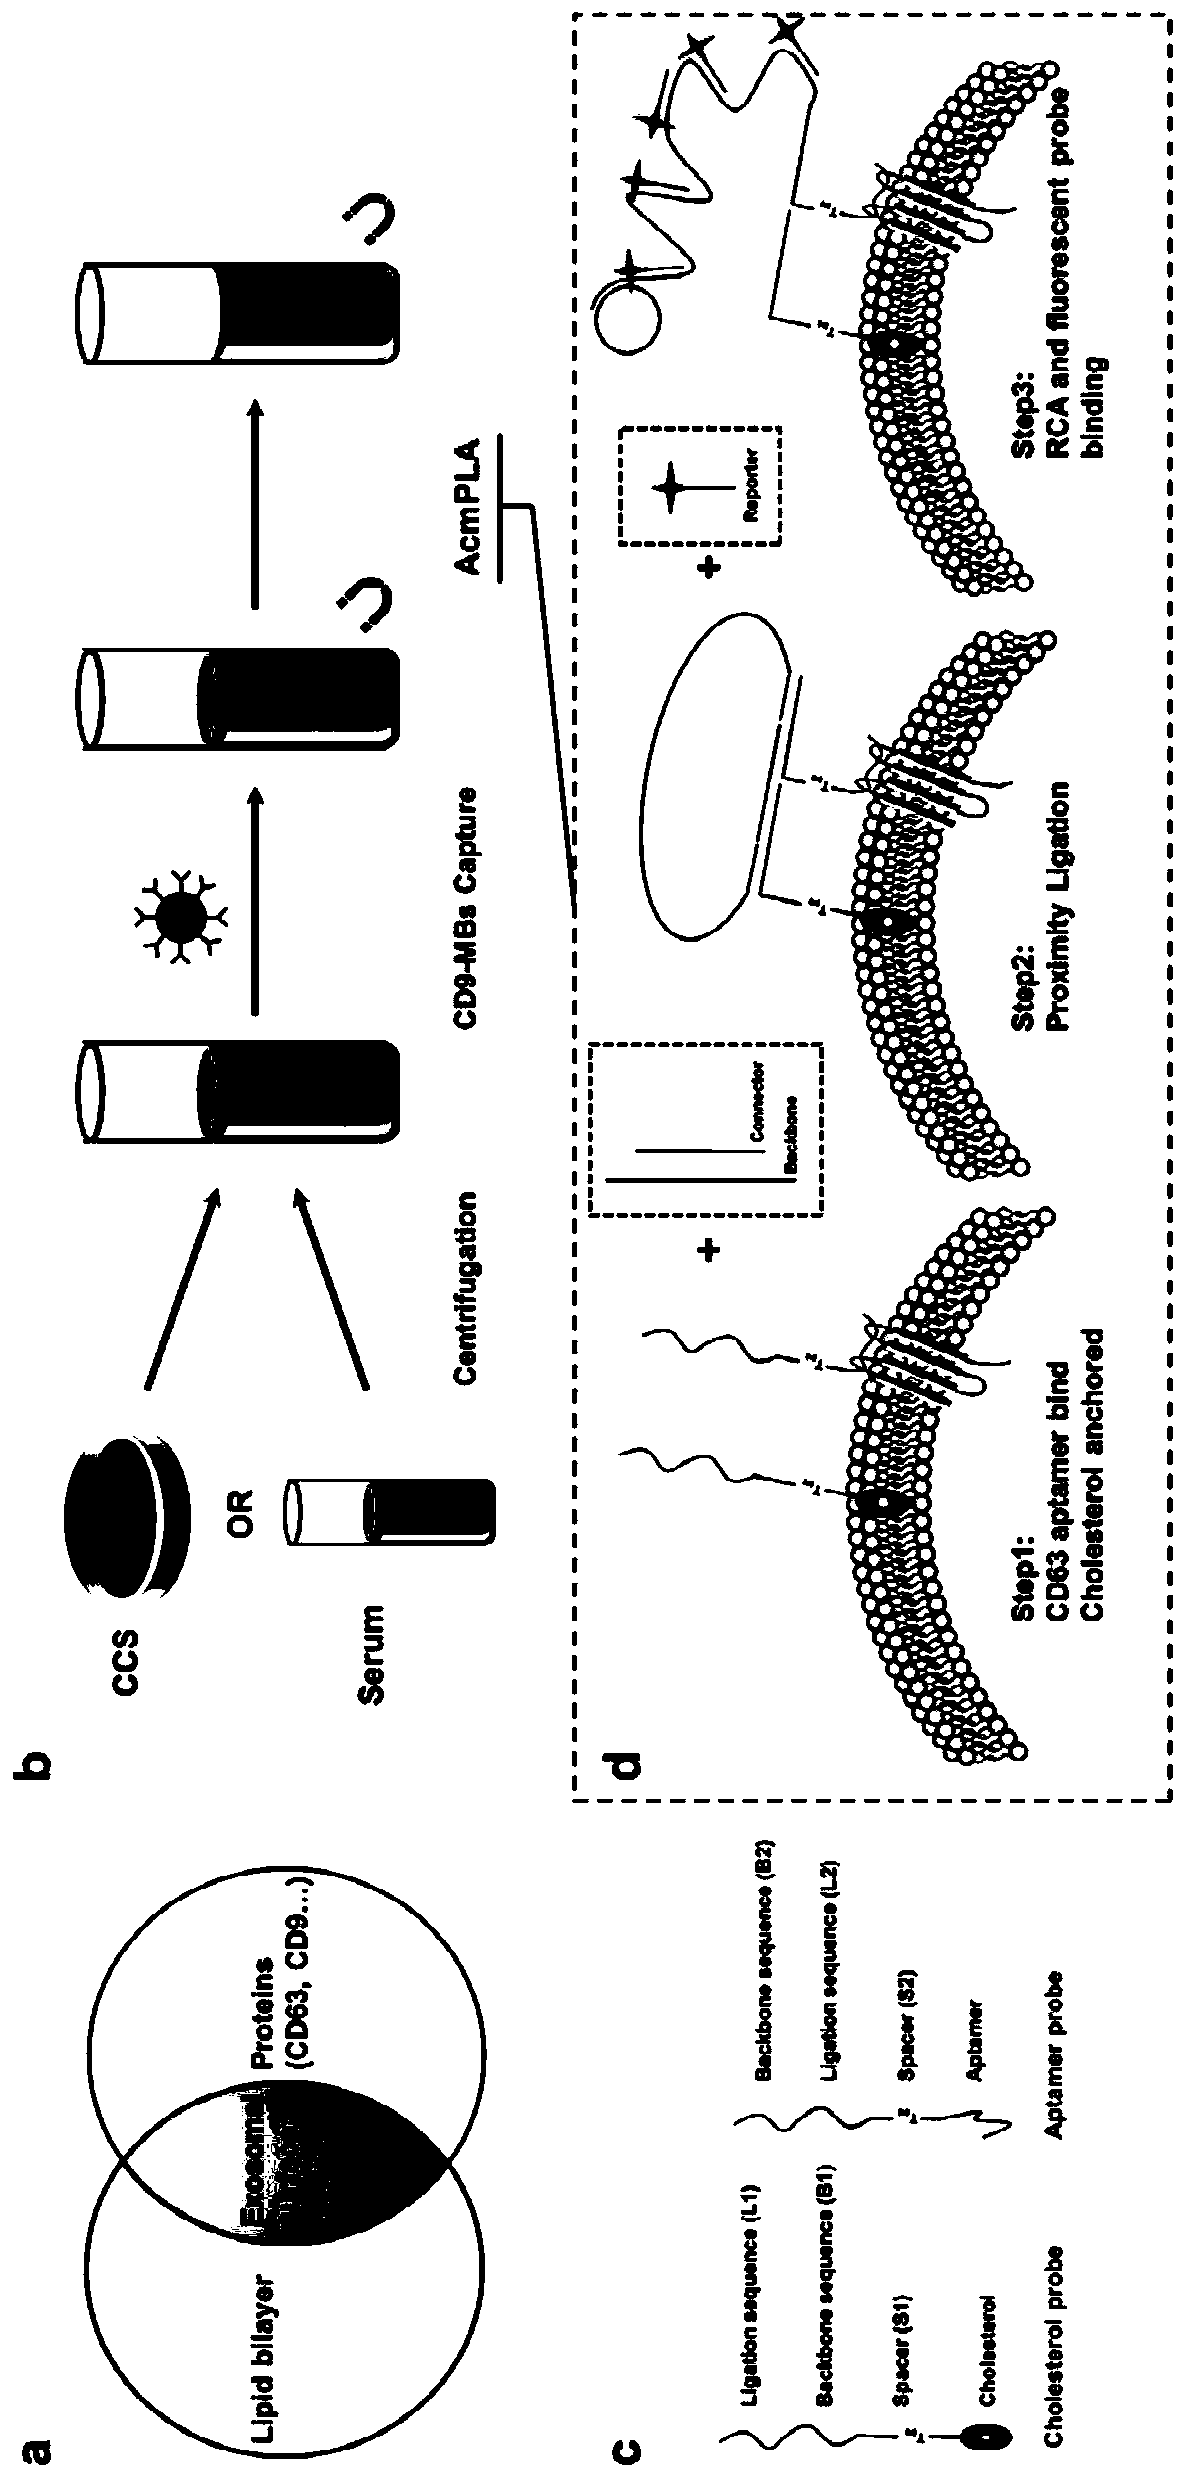 High-specificity exosome separation, detection and enrichment method